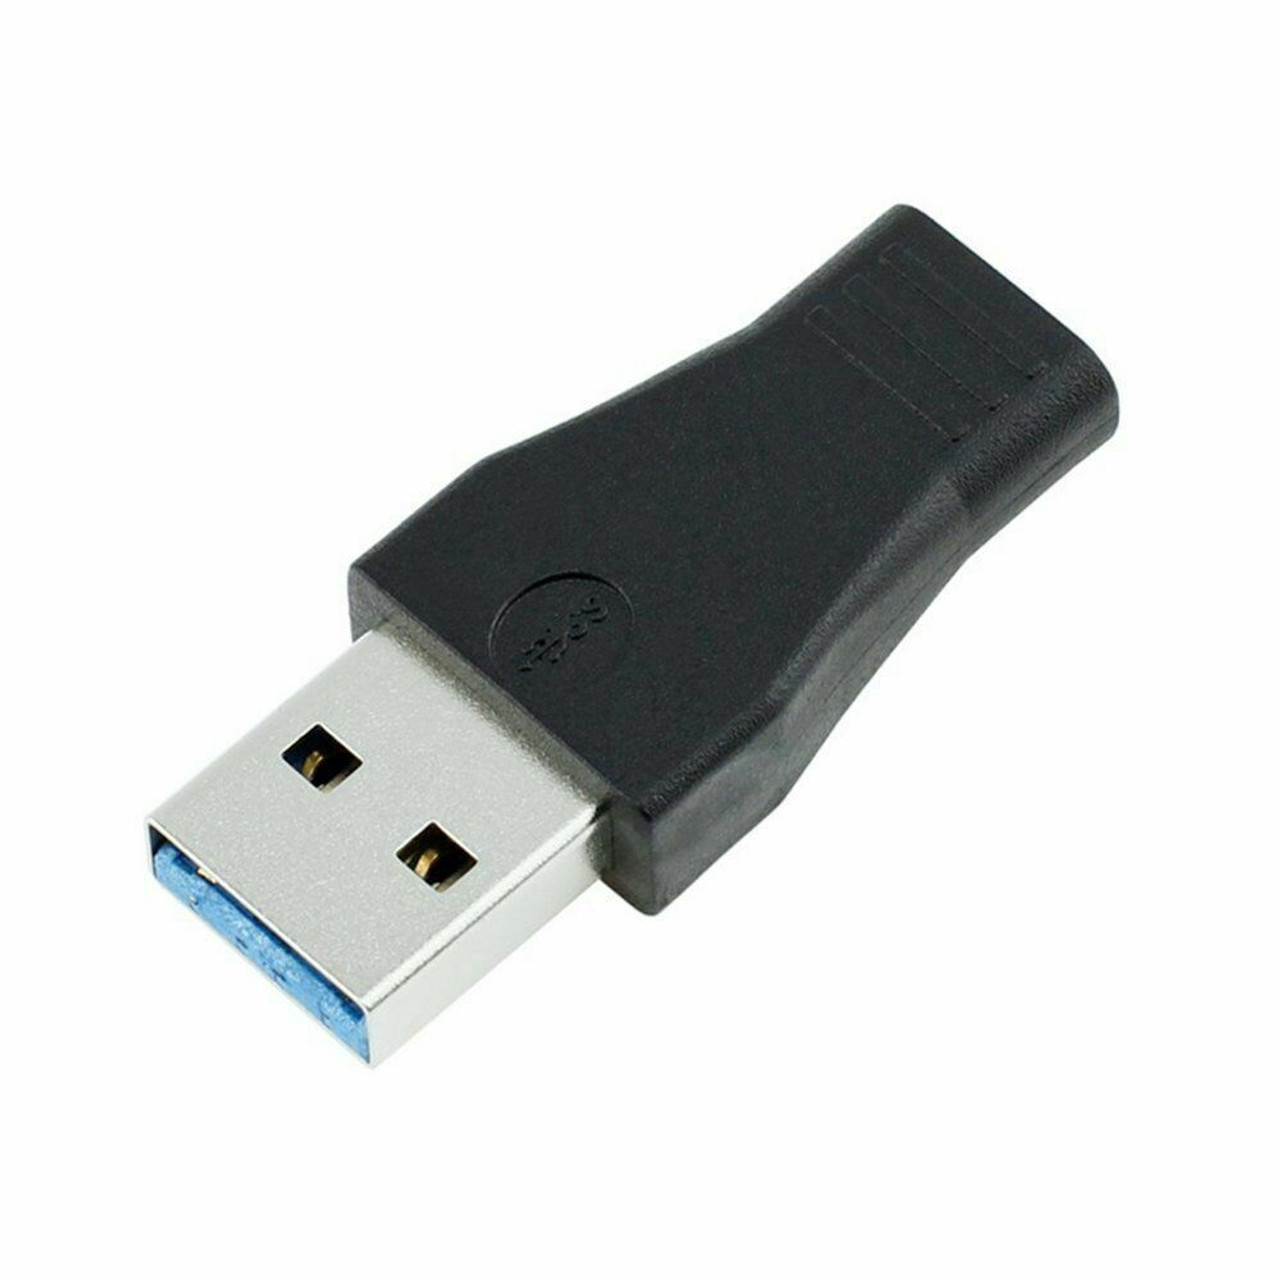 USB 3.1 Type C USB-C Female to USB 3.0 Male Port adapter Type-A Card Converter